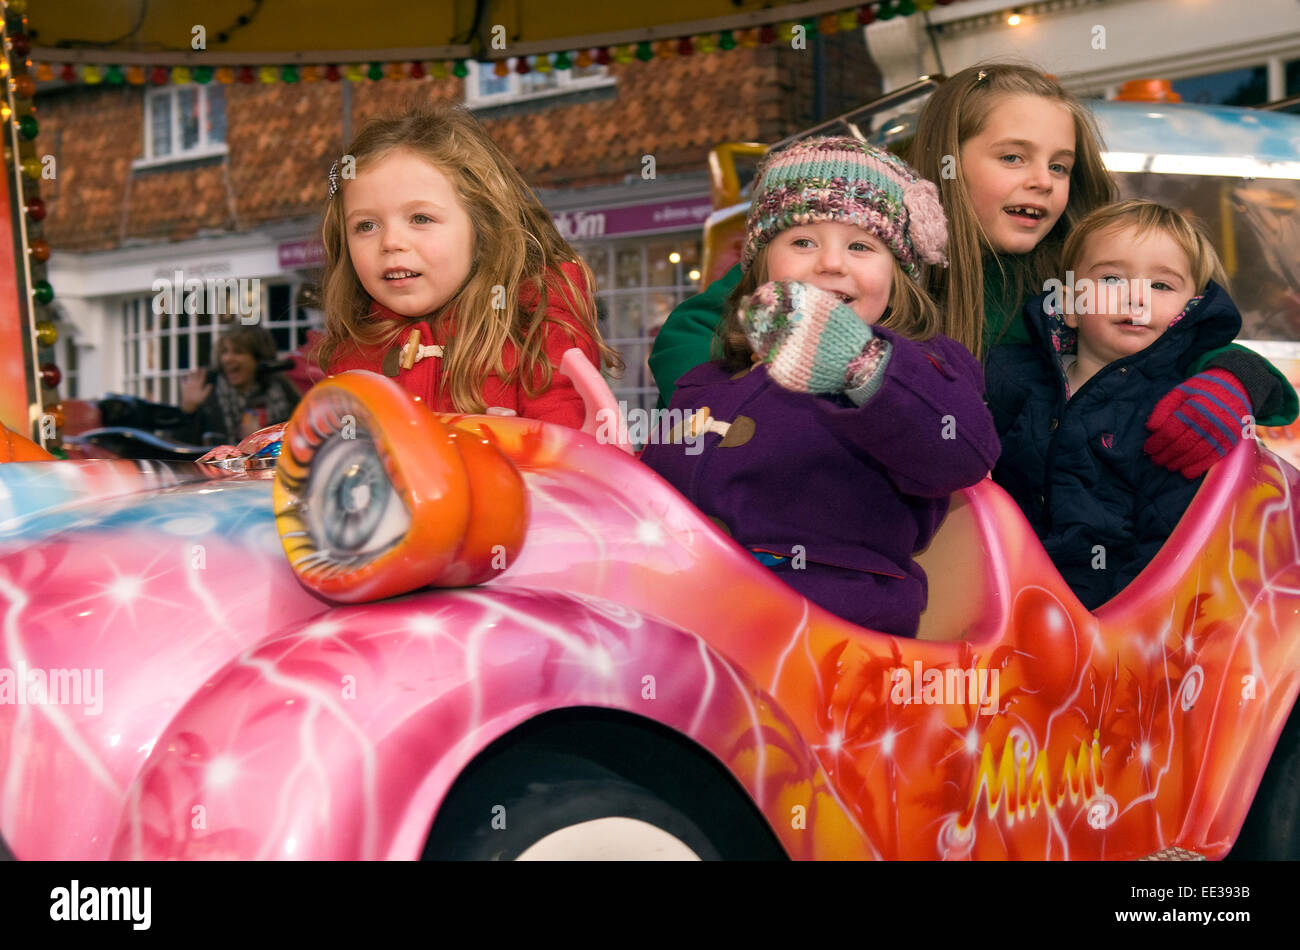 Group of 4 kids having fun on a fairground ride at an outdoor christmas market, High Street, Haslemere, Surrey, UK.  December 20 Stock Photo